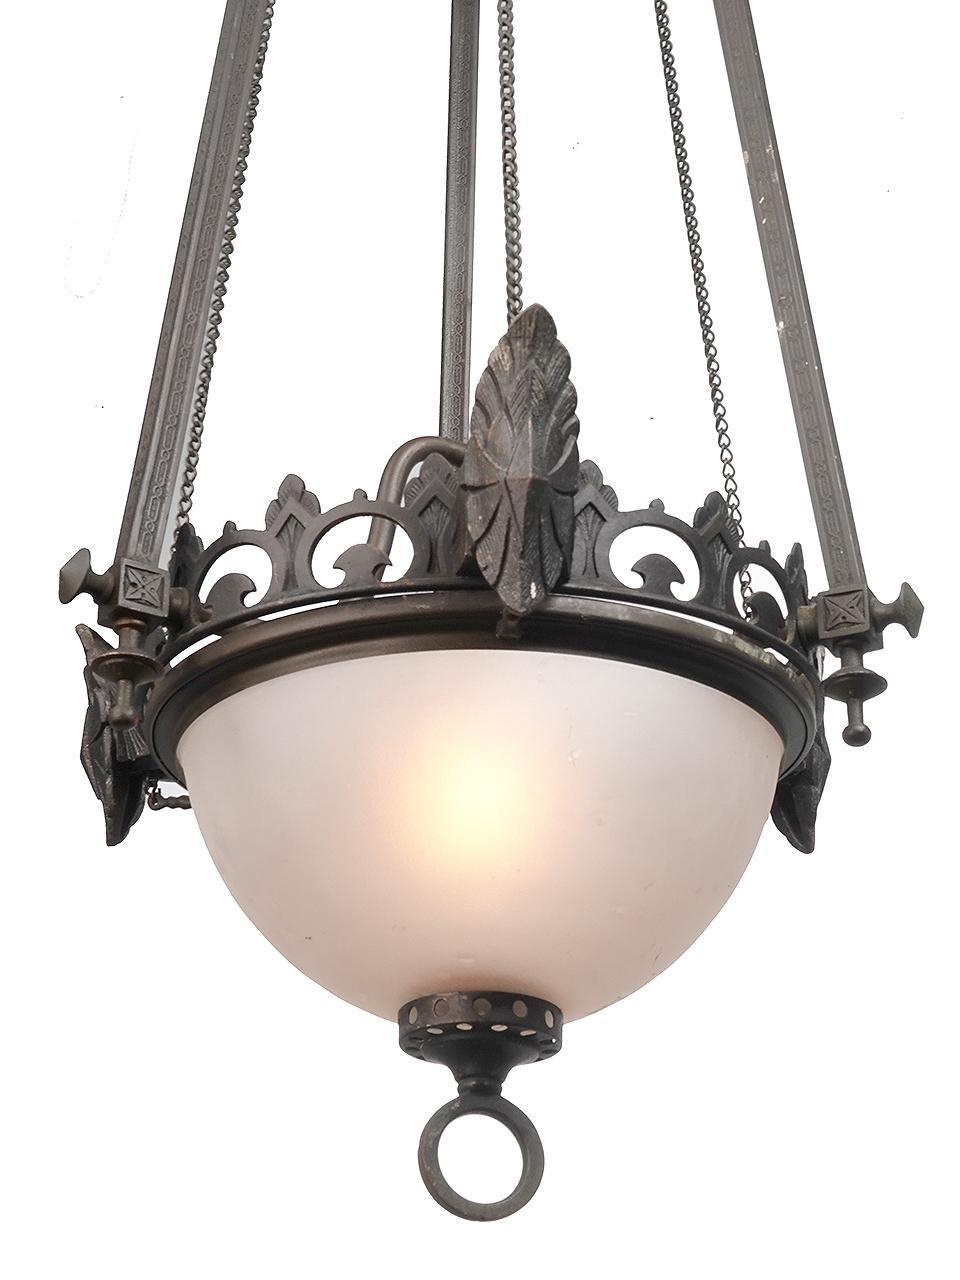 Original 3 Chain Pull Down Gas Lamp, Newly Wired In Good Condition In Peekskill, NY